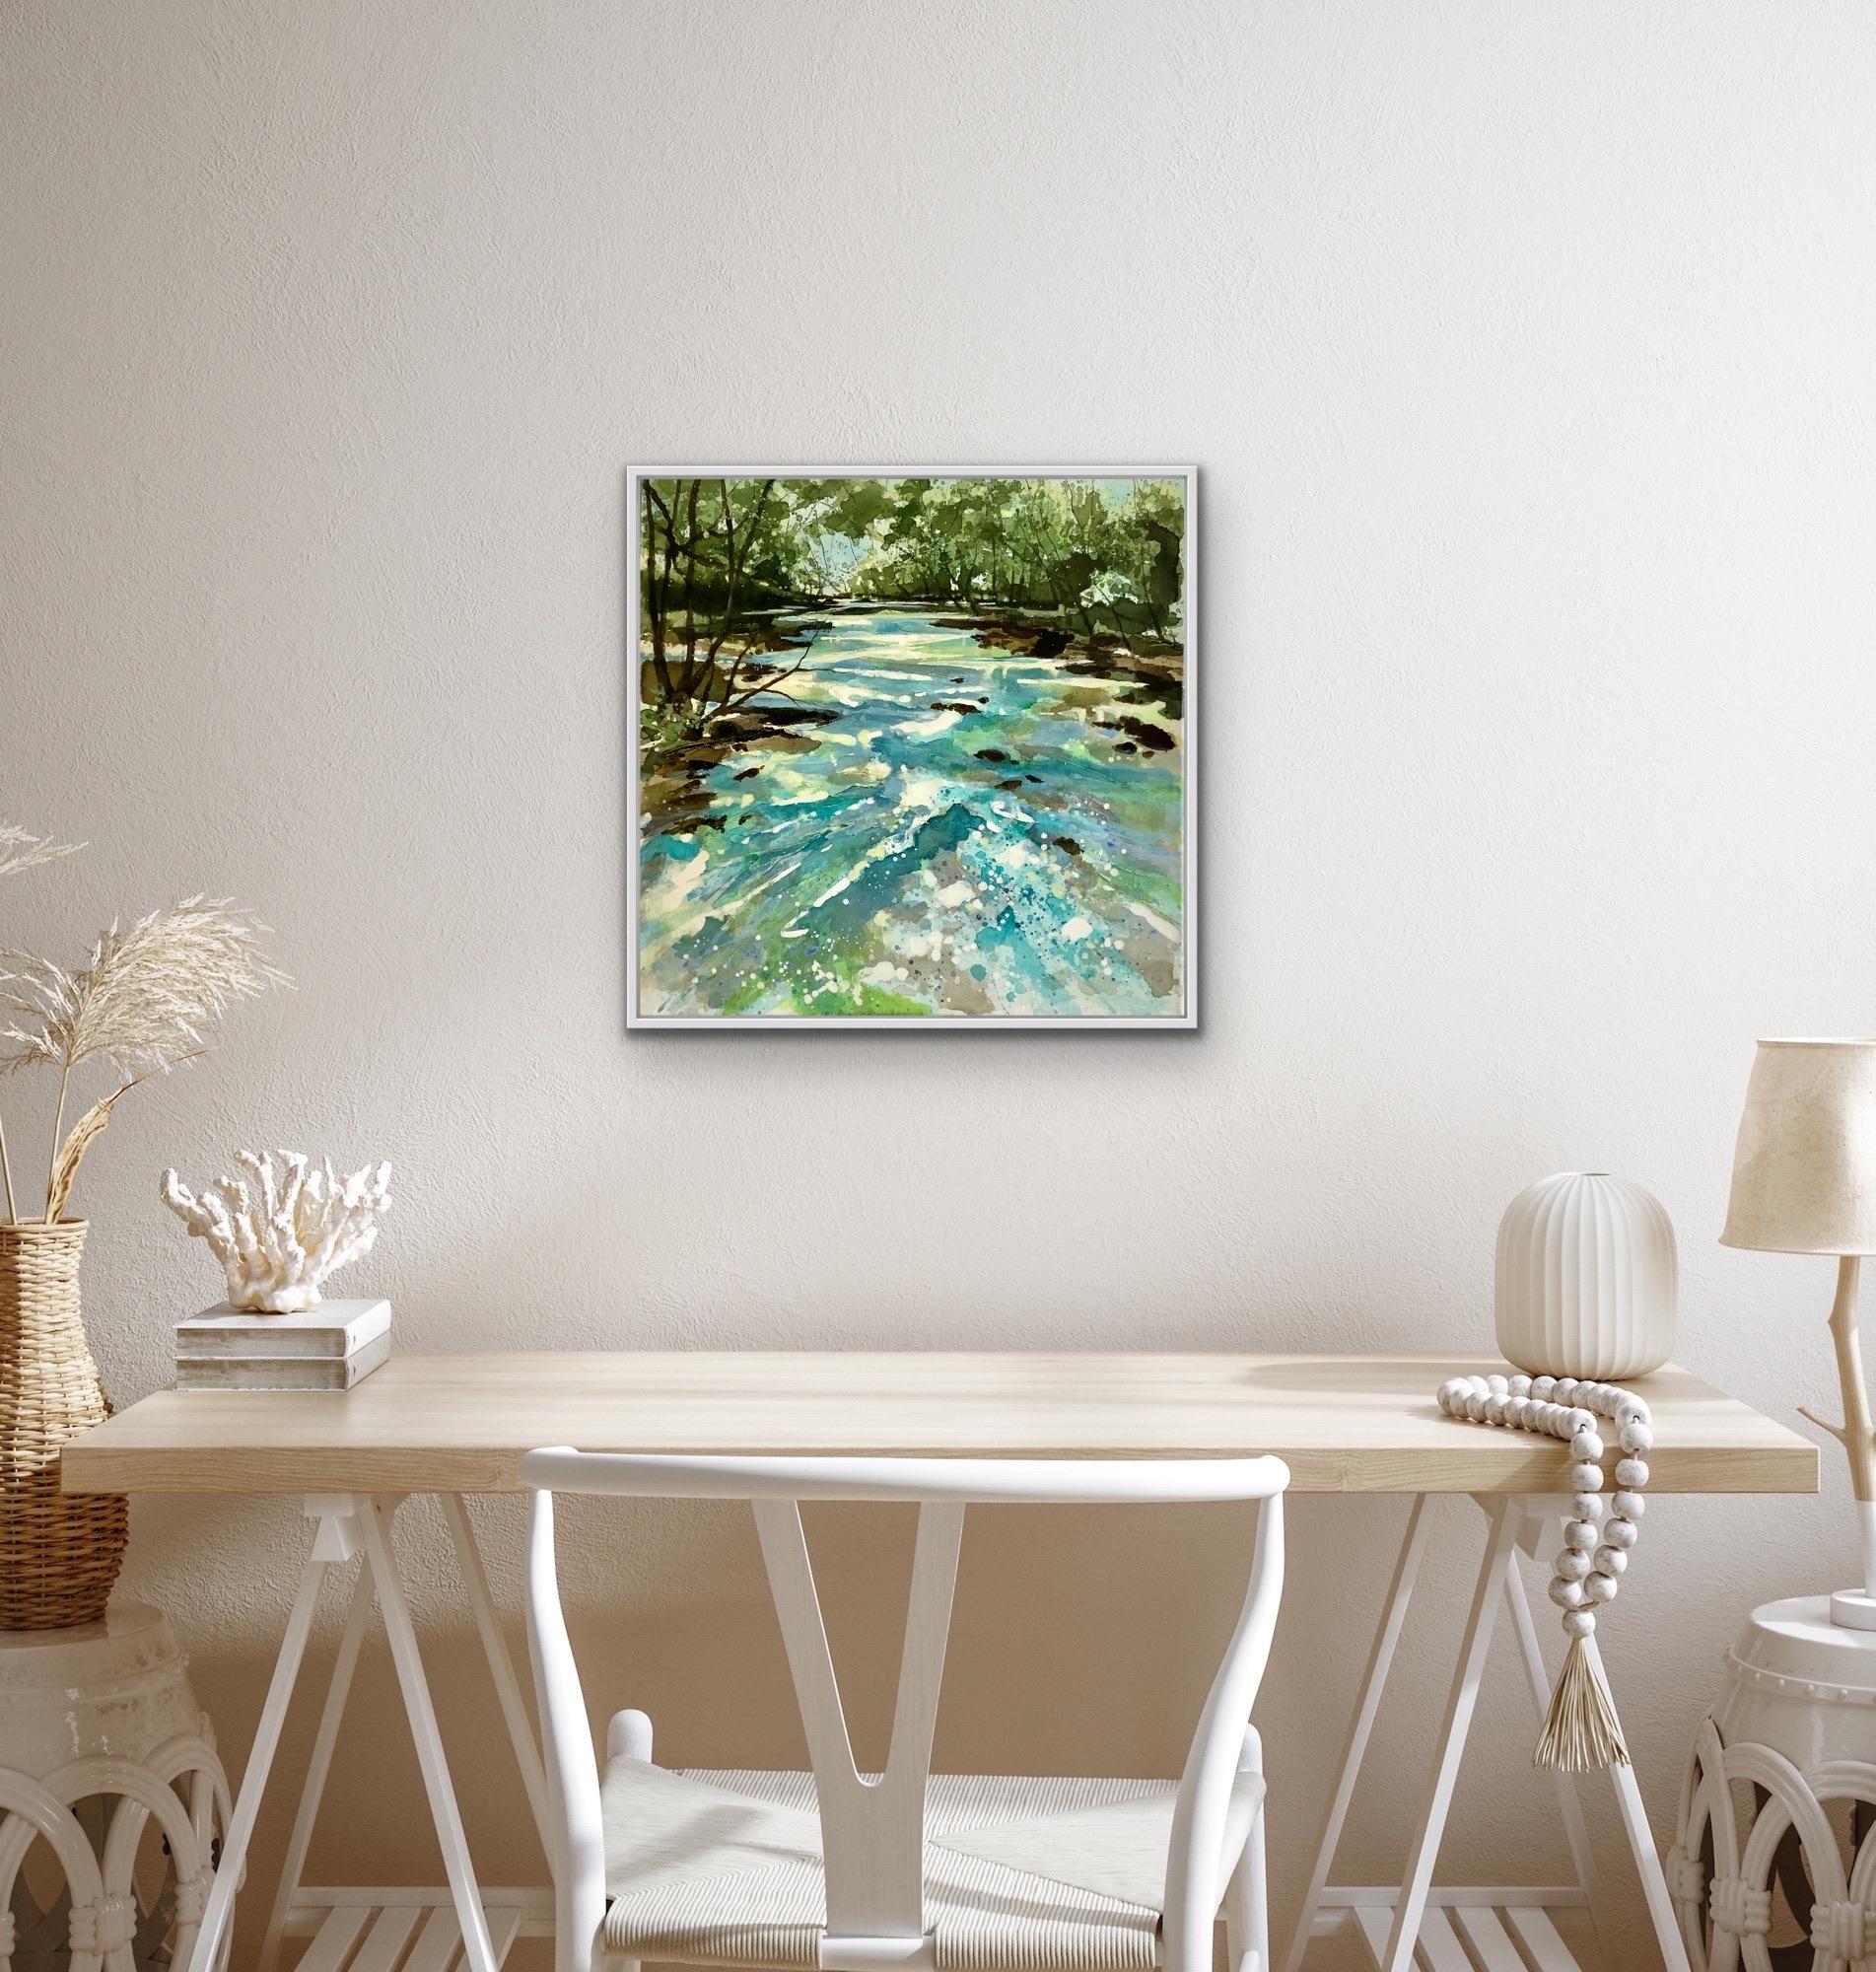 Always Our Place, Original painting, Landscape art, River Wye, Hereford, Green - Painting by Adele Riley